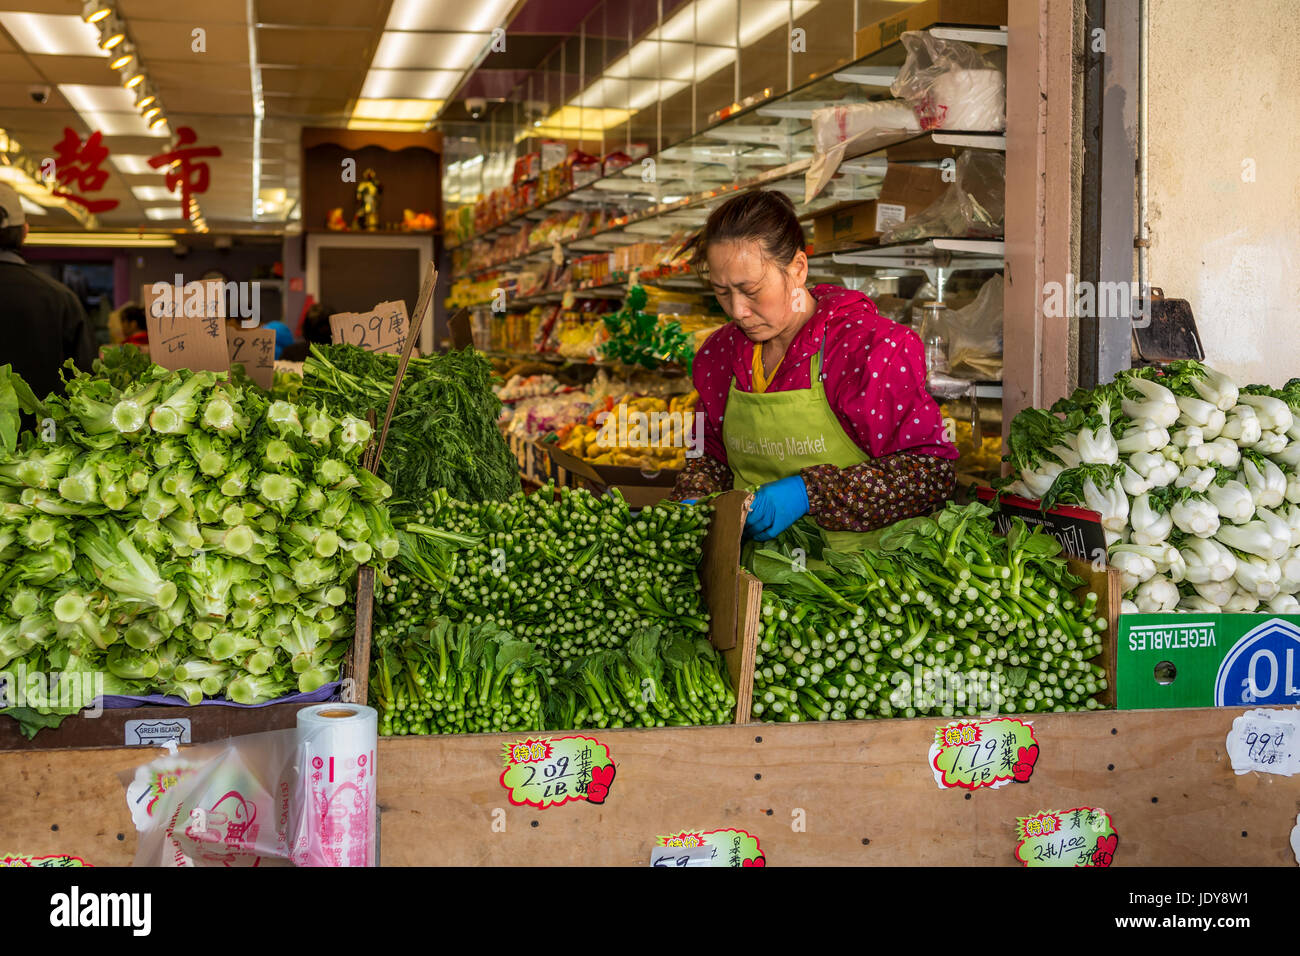 Chinese-American woman, clerk, worker, at work, working, fruit and vegetable market, Stockton Street, Chinatown, San Francisco, California Stock Photo